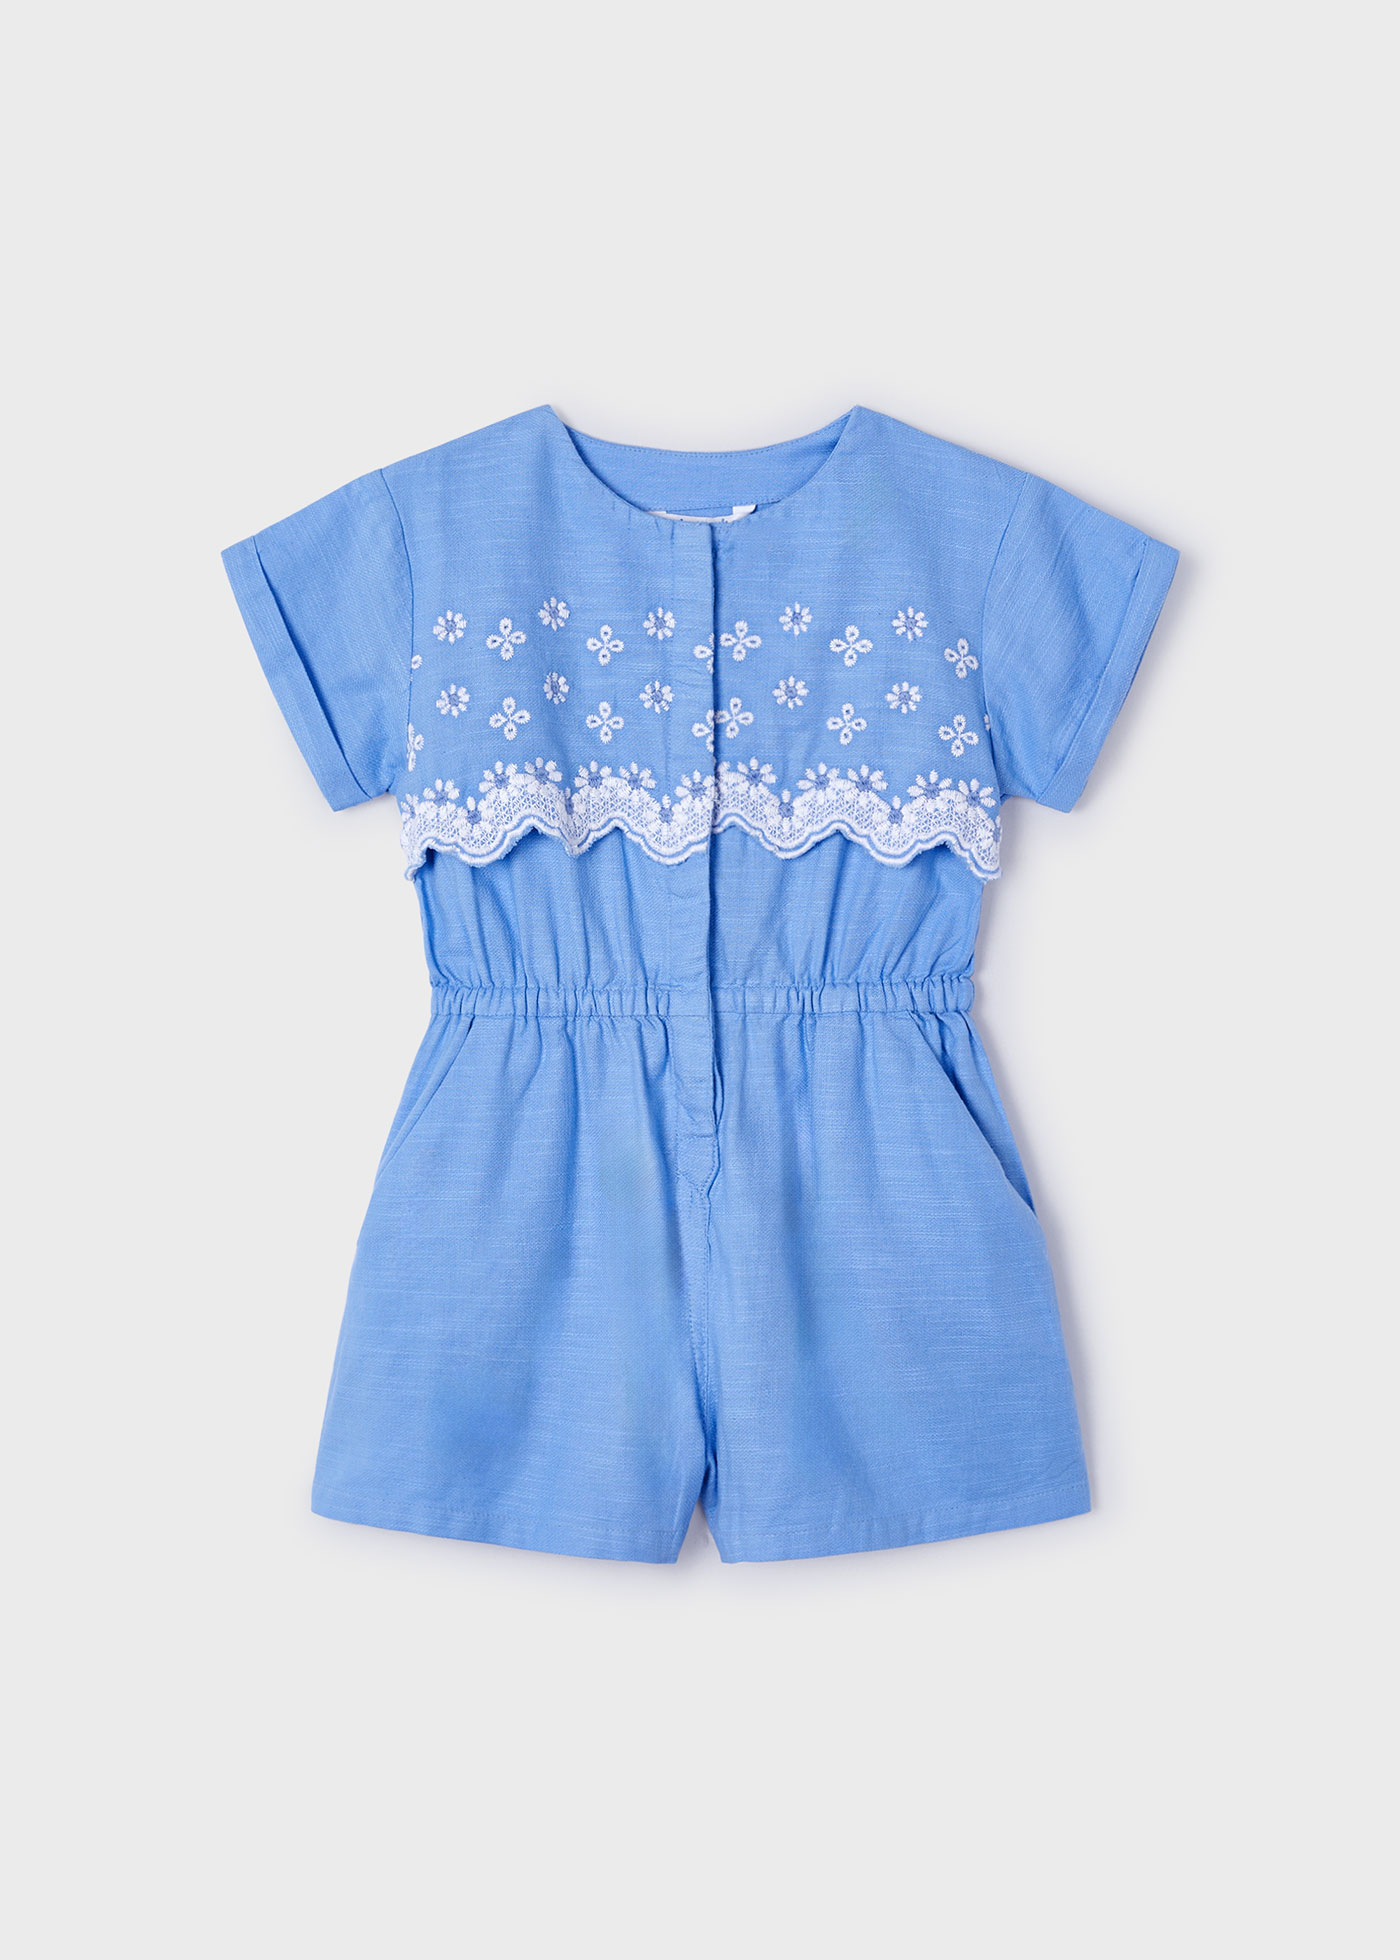 Girls embroidered romper